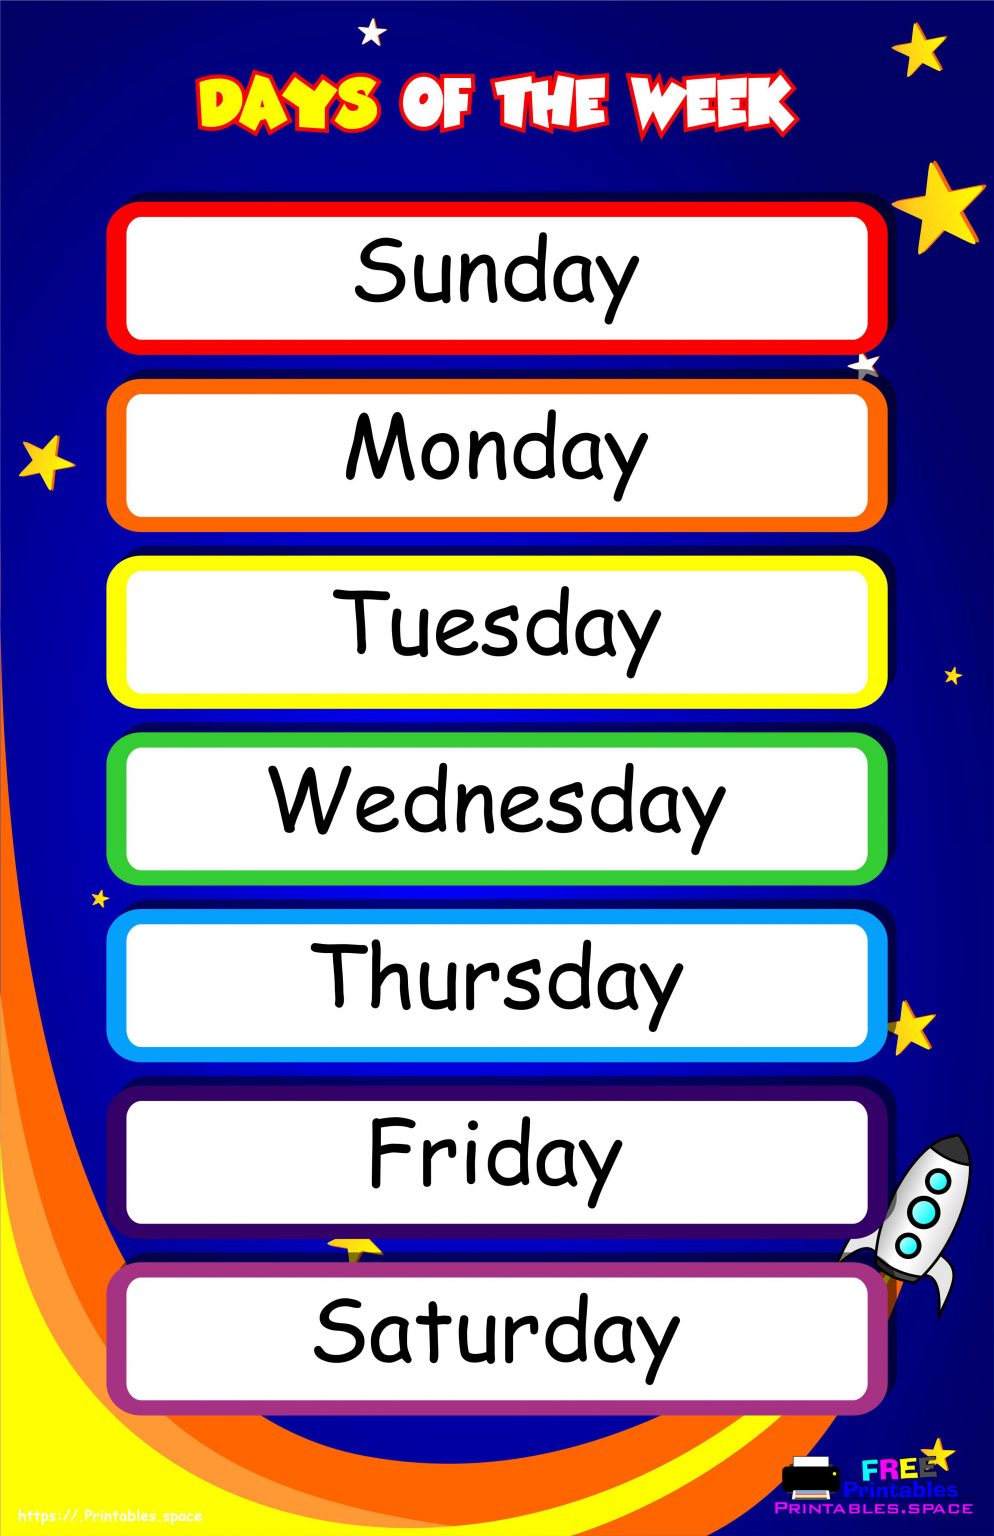 days-of-the-week-poster-free-printables